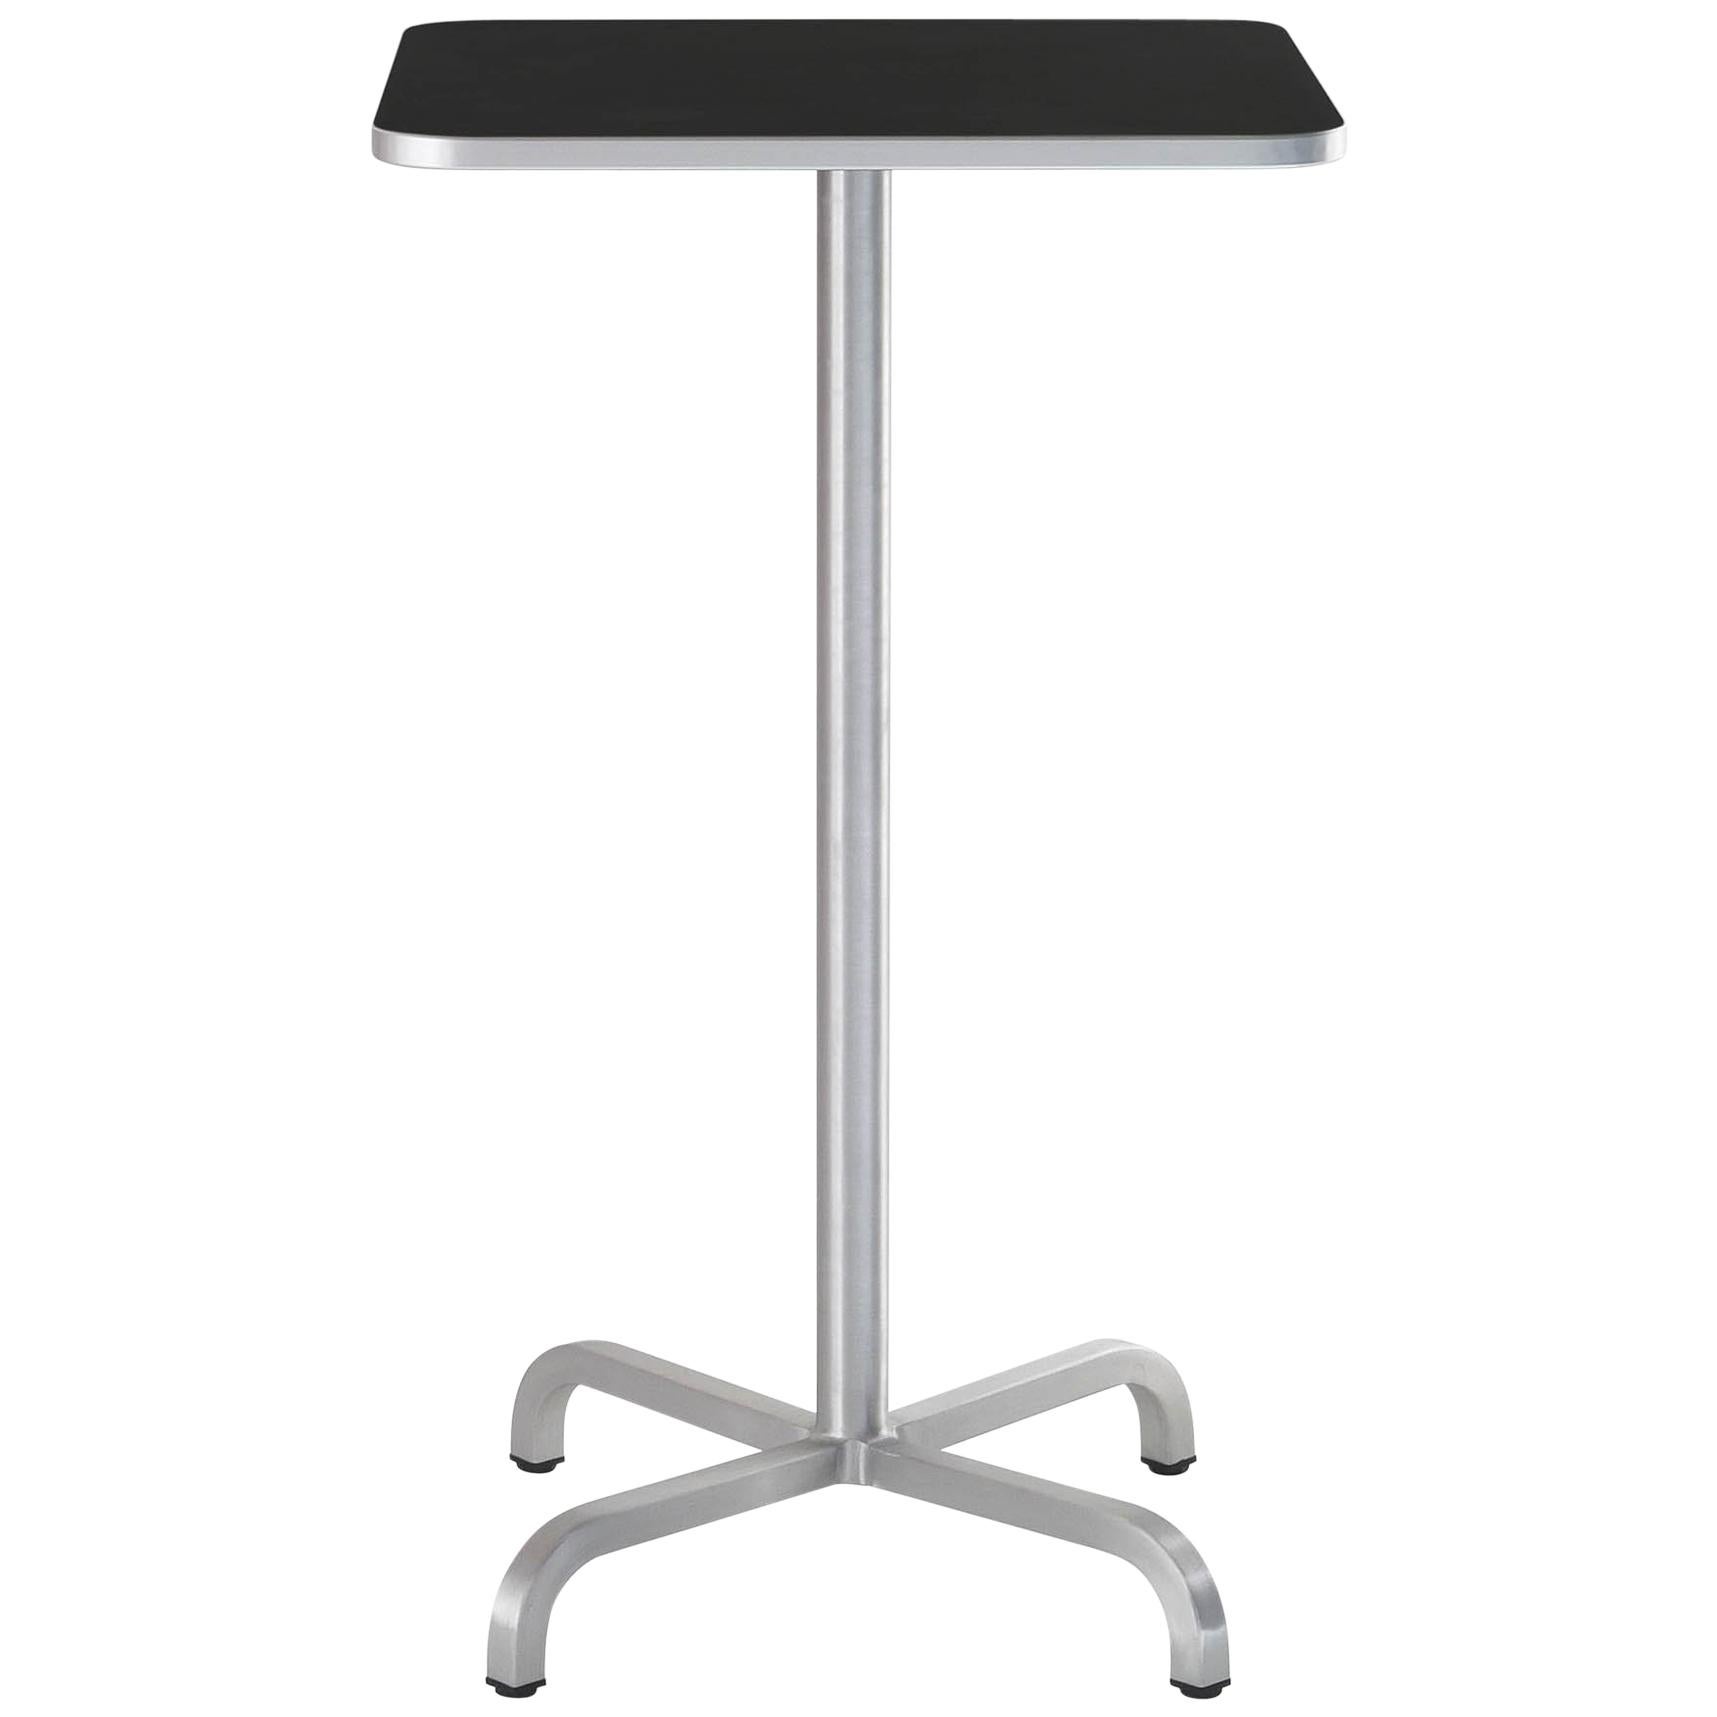 Emeco 20-06 Small Square Bar Table w/ Black Laminate Top by Norman Foster 